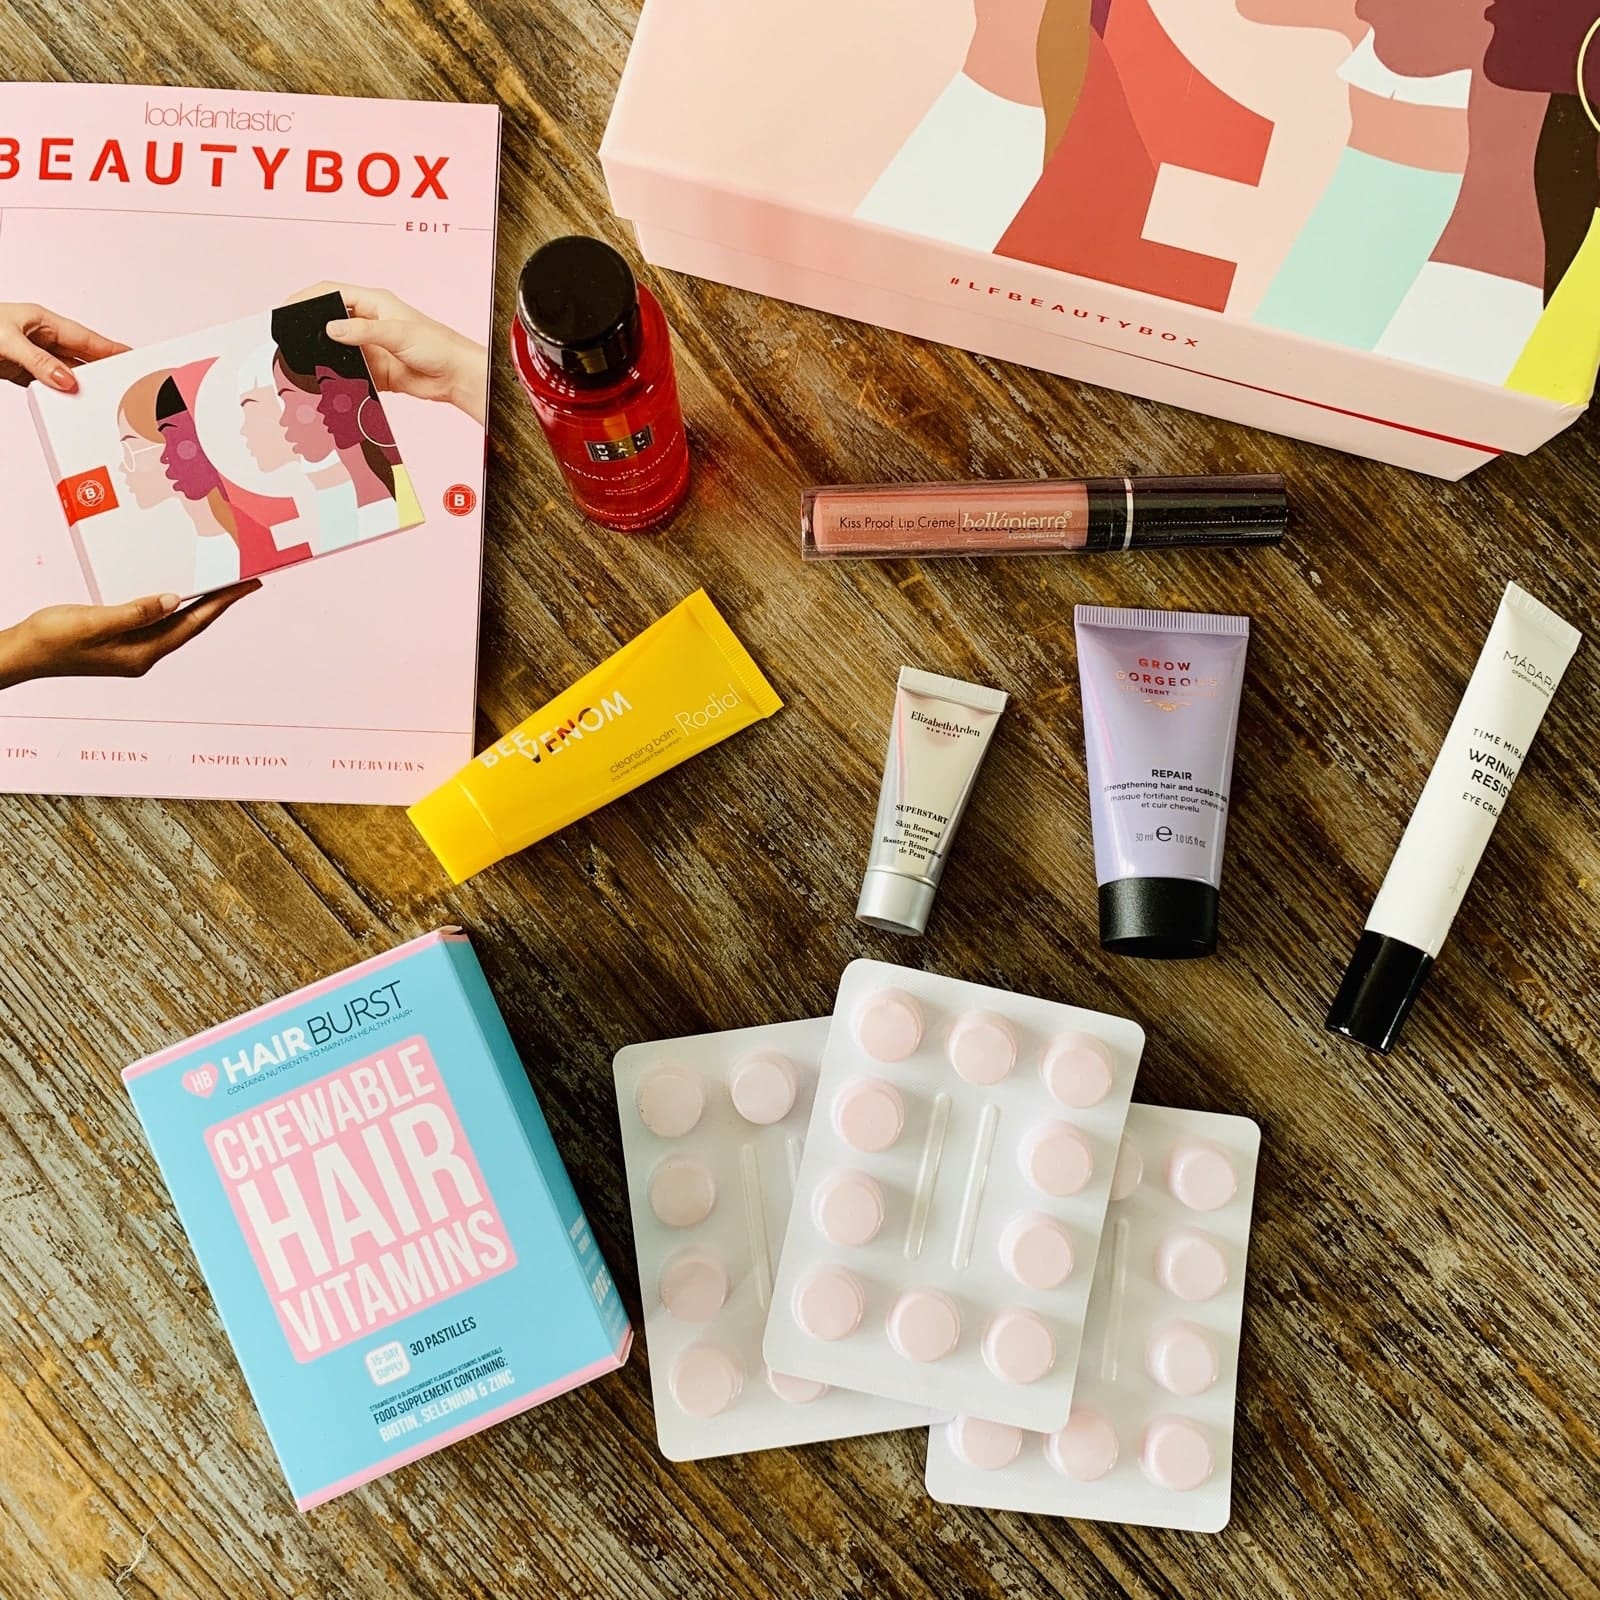 LookFantastic Beauty Box March 2020 Review "Unconstricted" Edition + 15